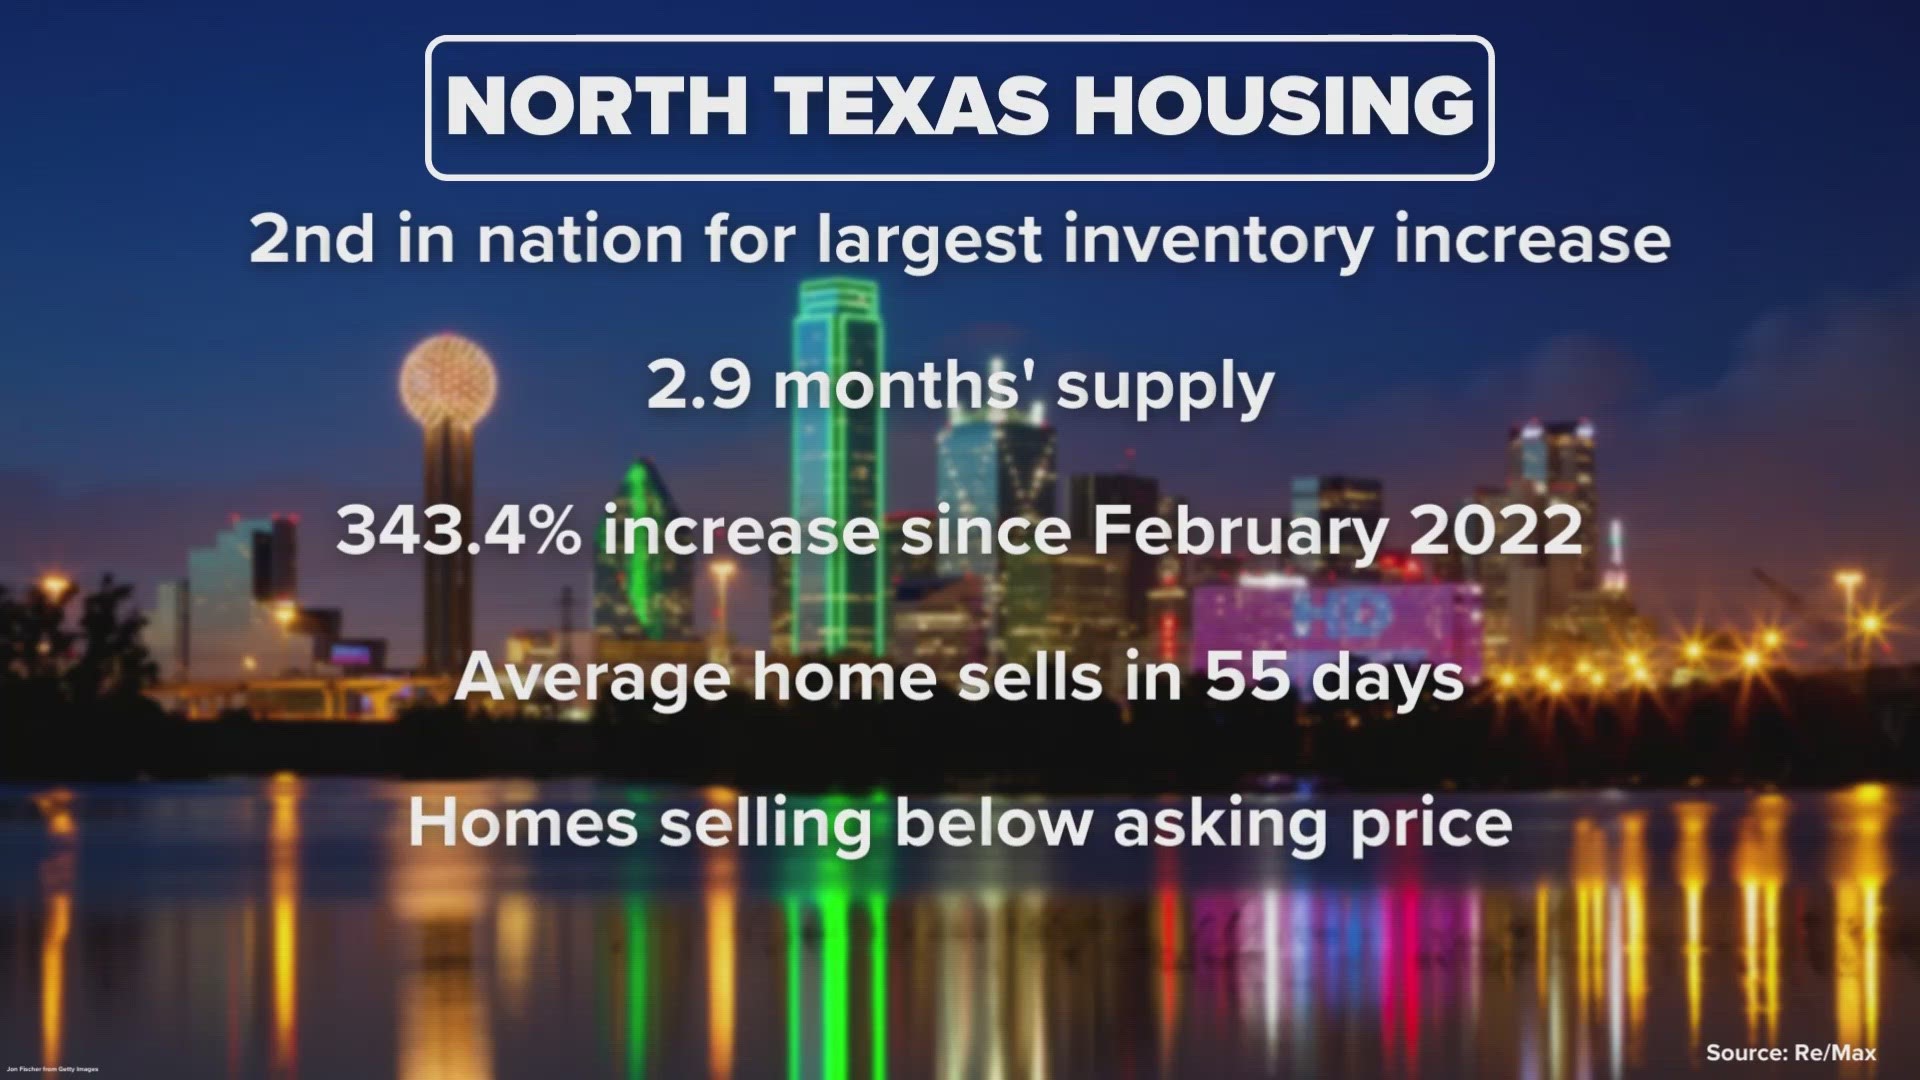 One report ranks North Texas second in the country for the largest inventory increase.